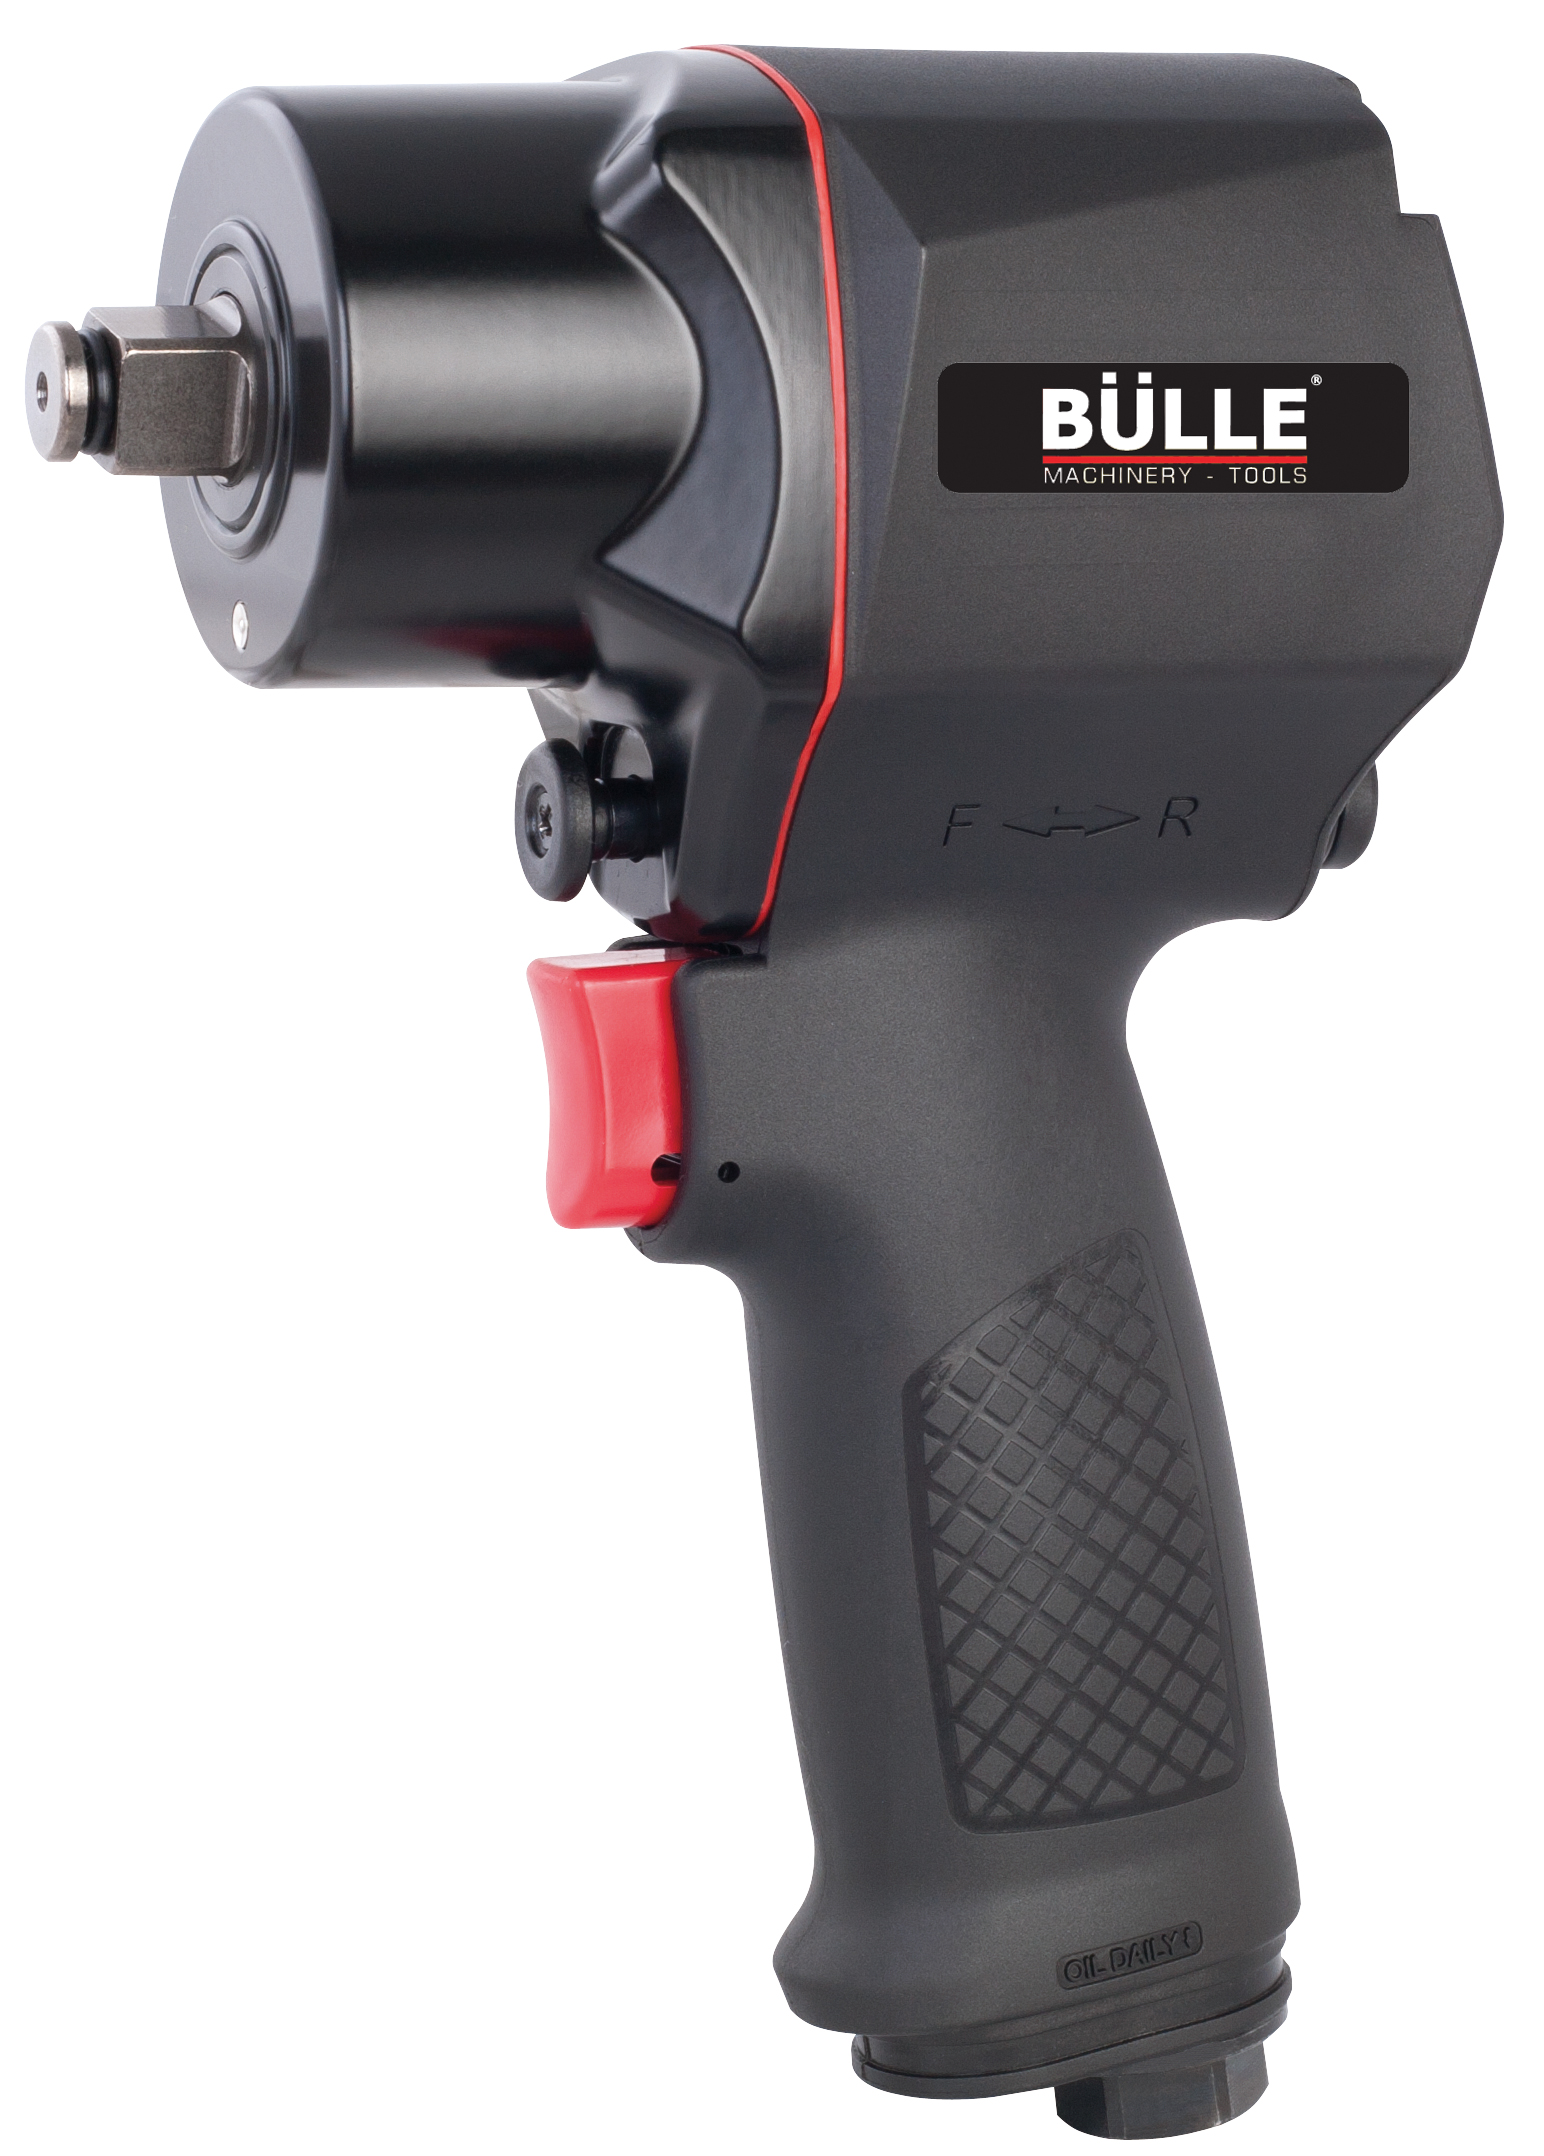 Air Impact Wrench 1/2" Short Shank Professional (HD) Twin Hammer Composite Bulle